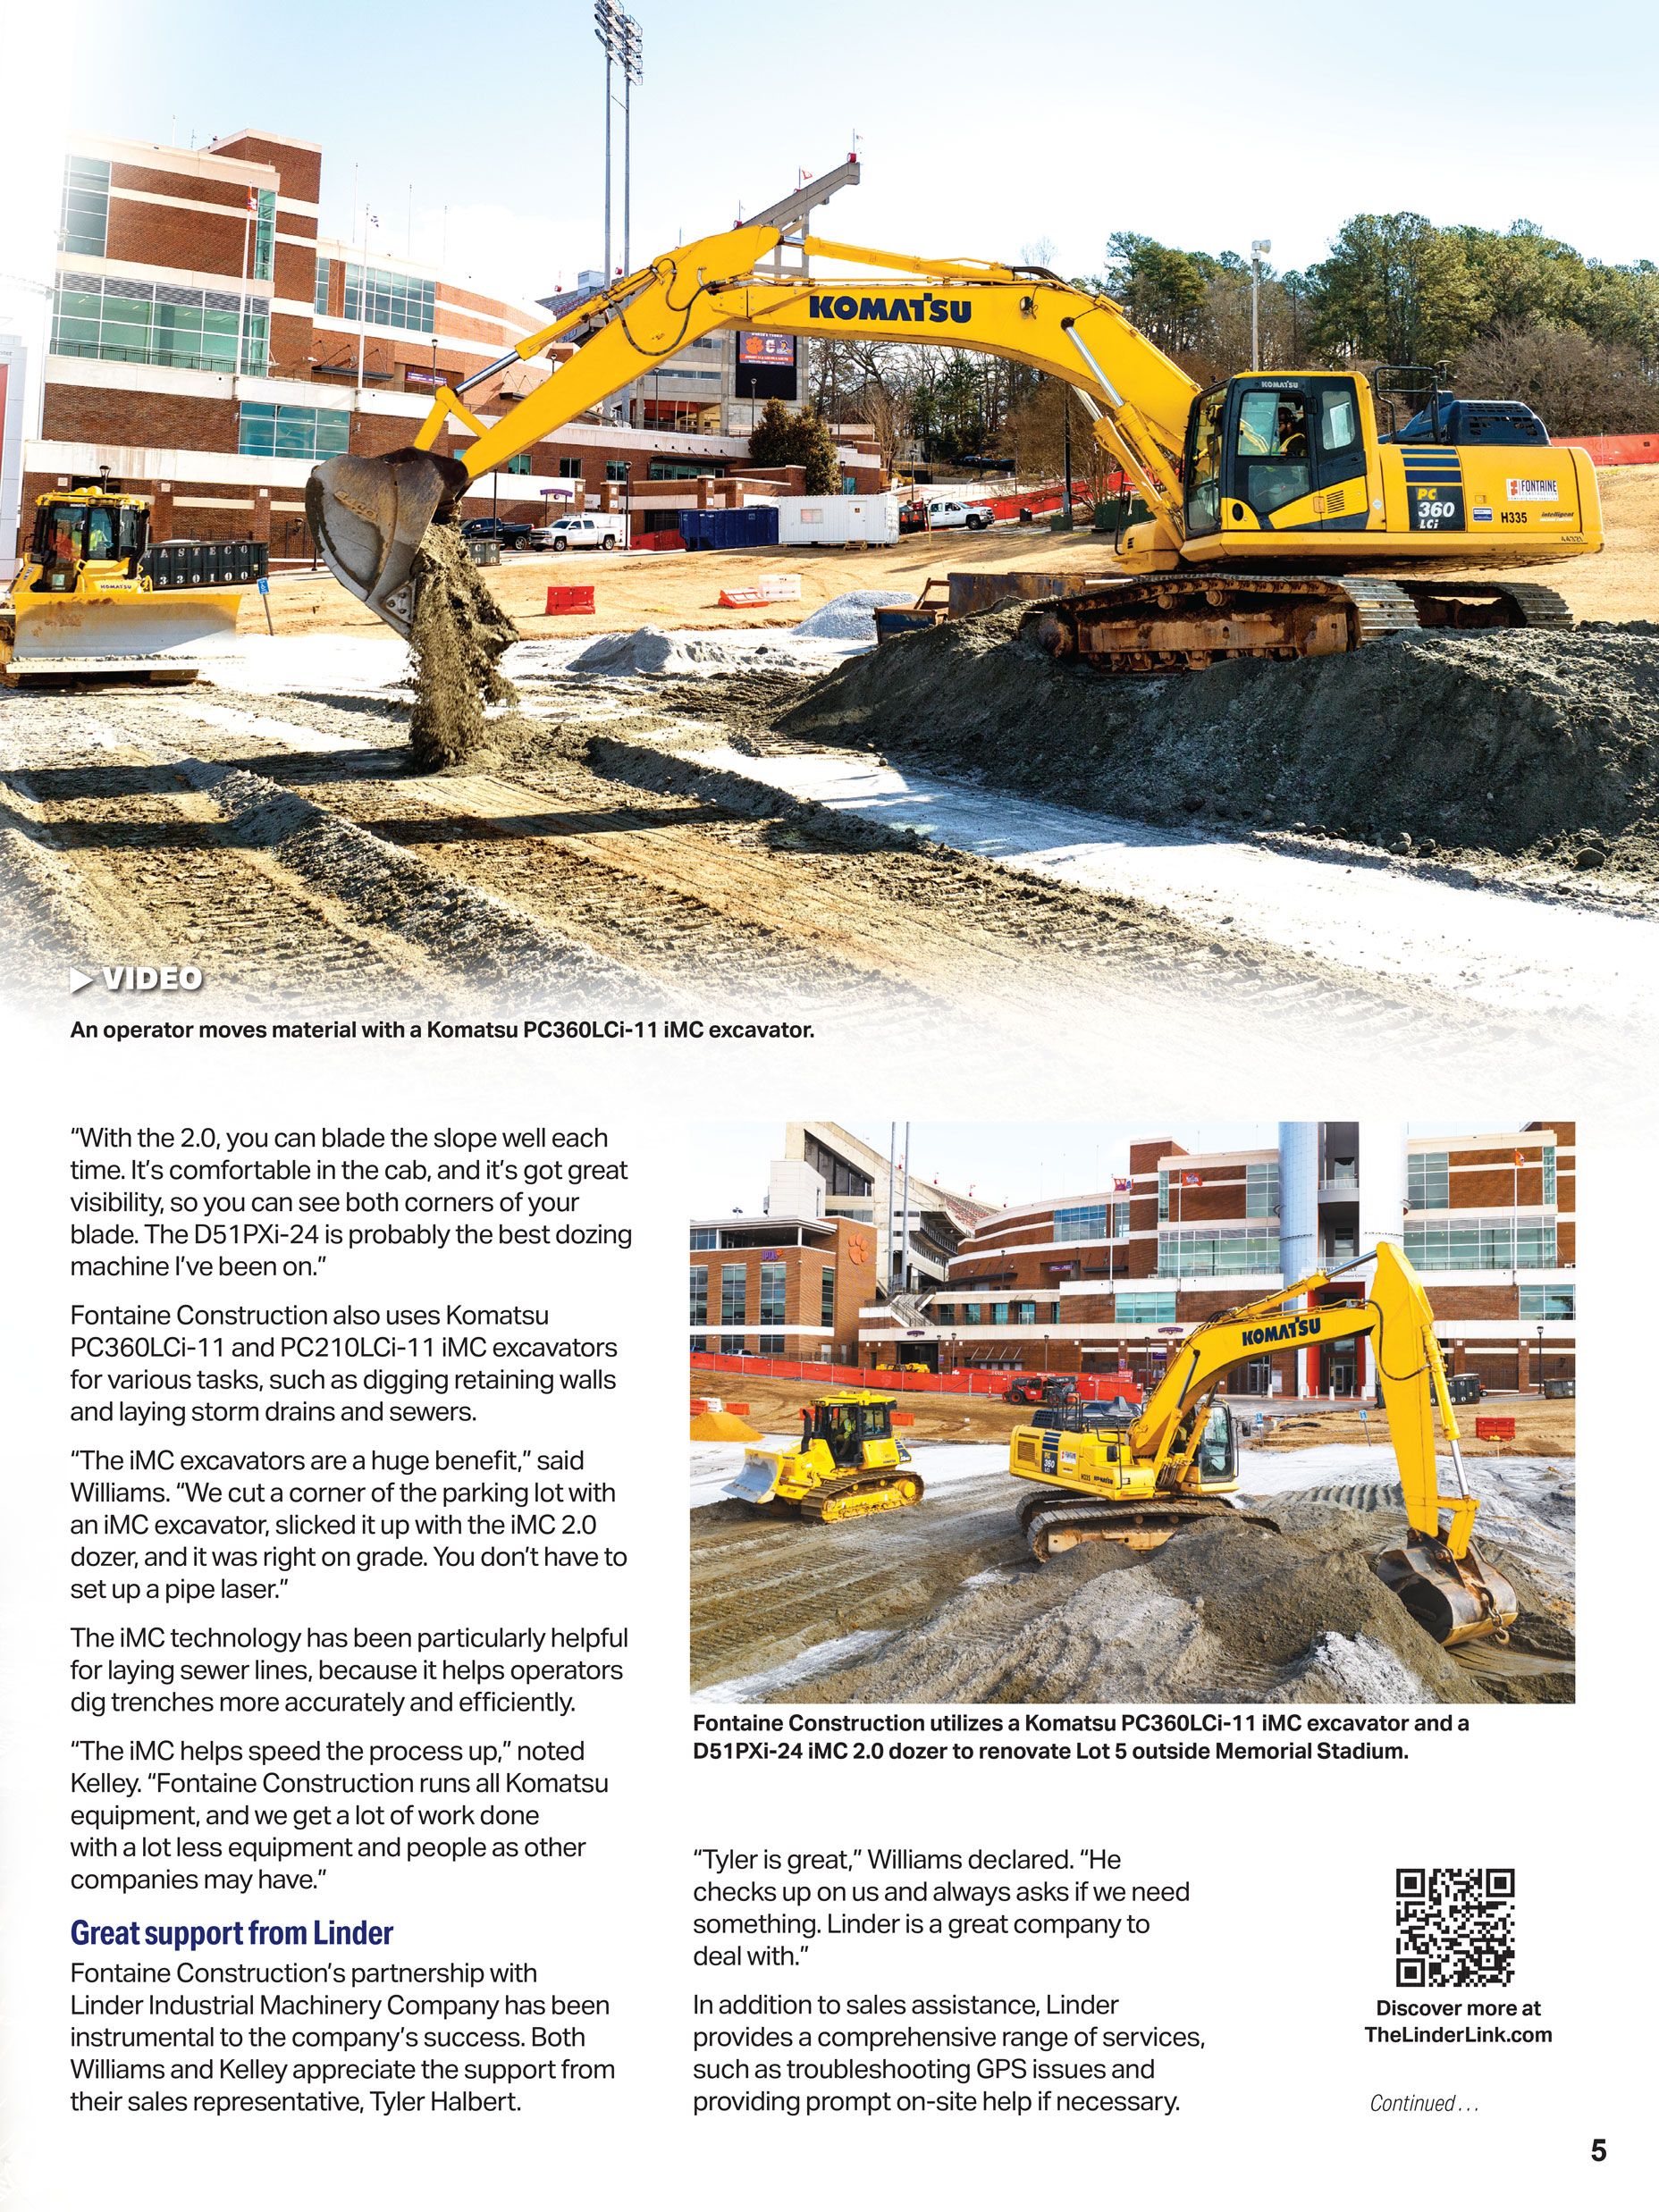 Page 2 of a magazine spread showcasing Fontaine Construction